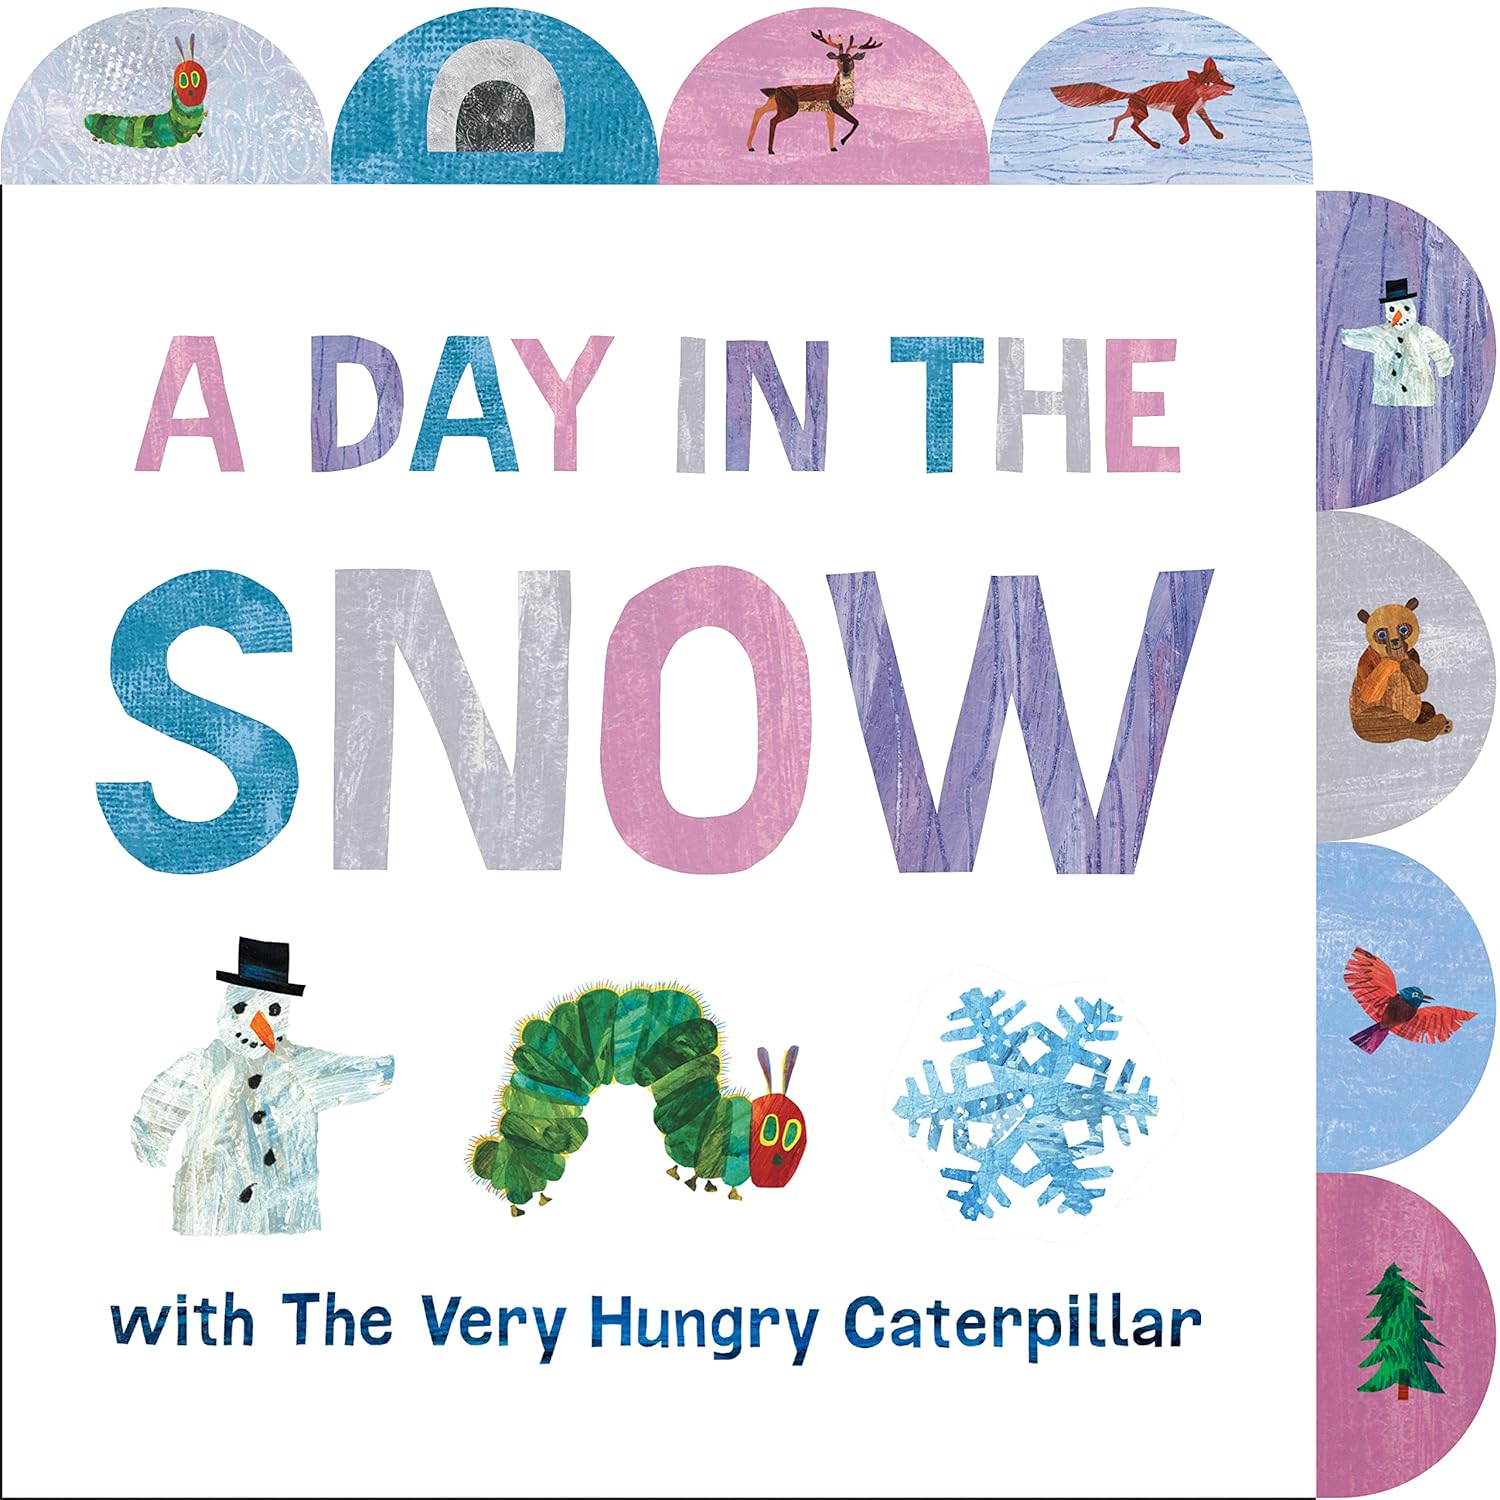 A Day in the Snow with the Very Hungry Caterpillar: A Tabbed Board Book - by Eric Carle